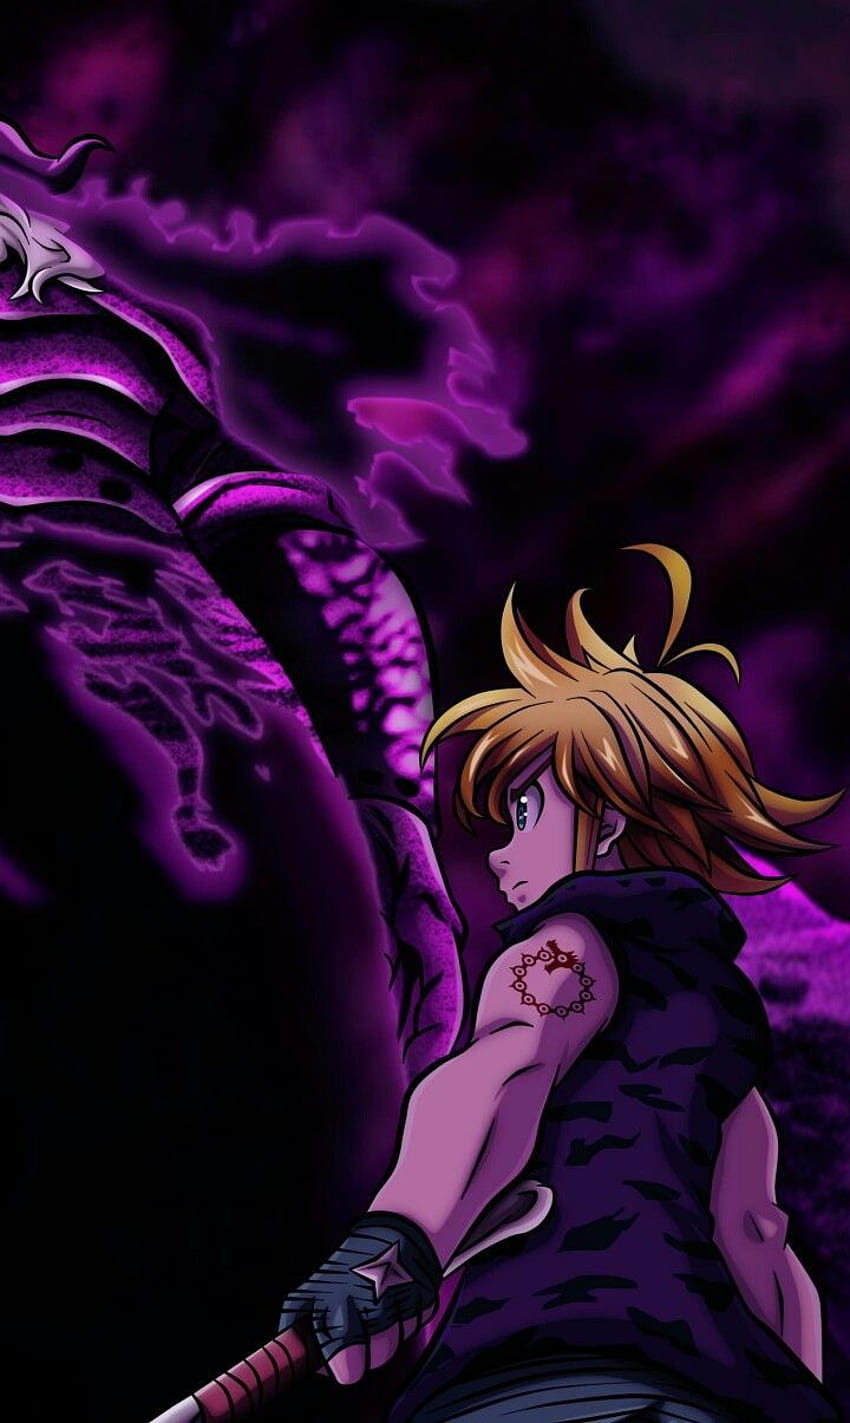 Wallpaper ID 331792  Anime The Seven Deadly Sins Phone Wallpaper Meliodas  The Seven Deadly Sins 1440x2560 free download